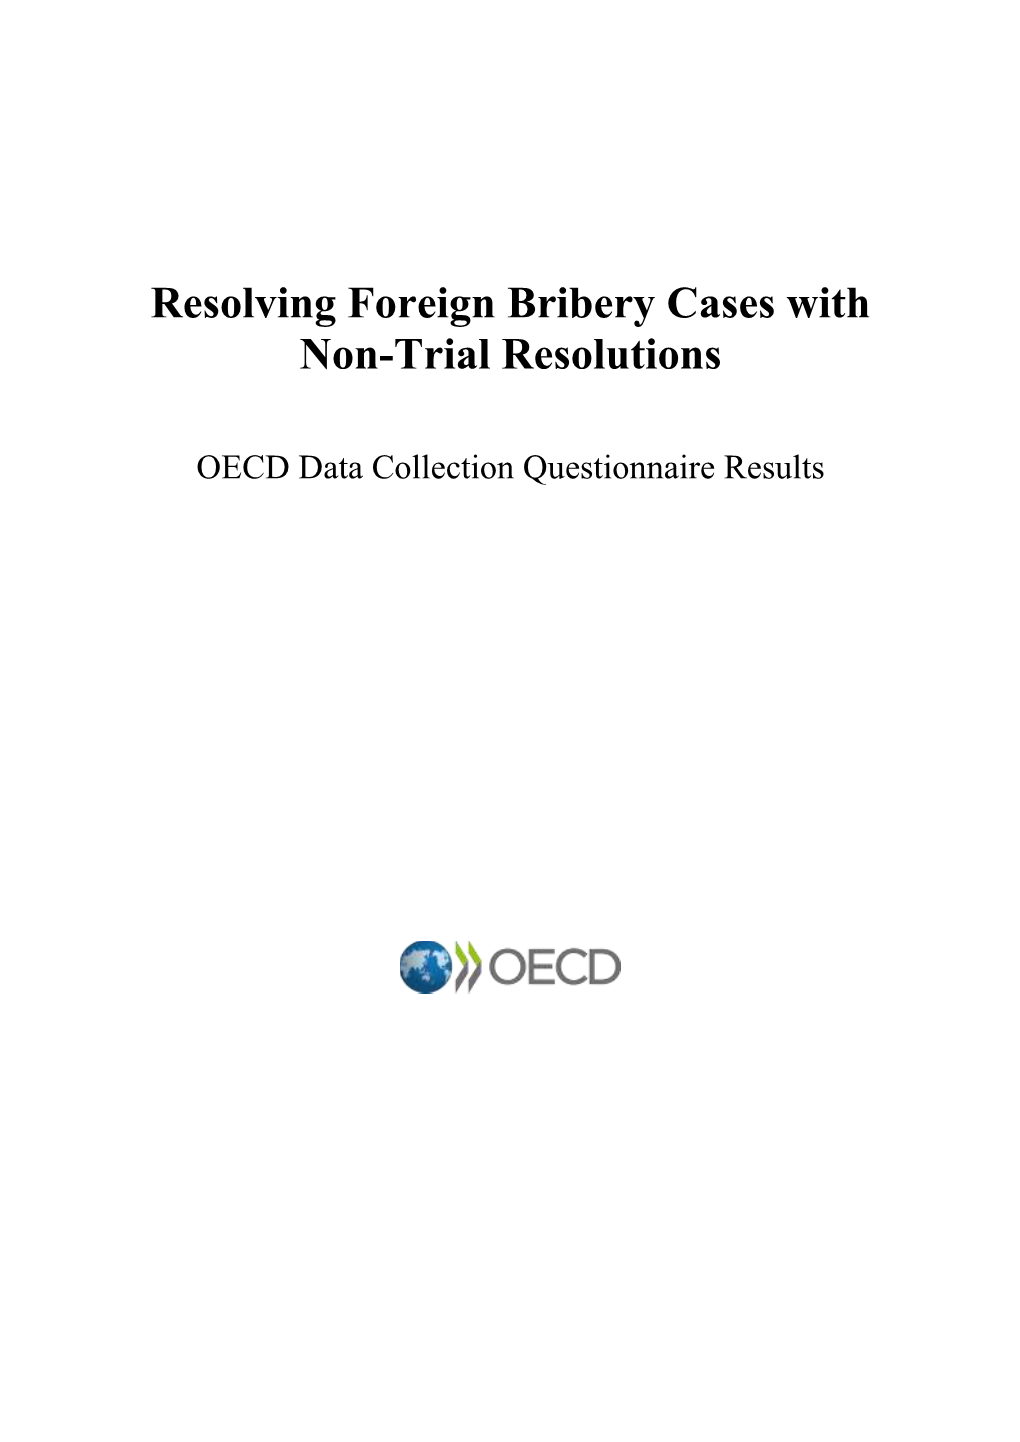 Resolving Foreign Bribery Cases with Non-Trial Resolutions